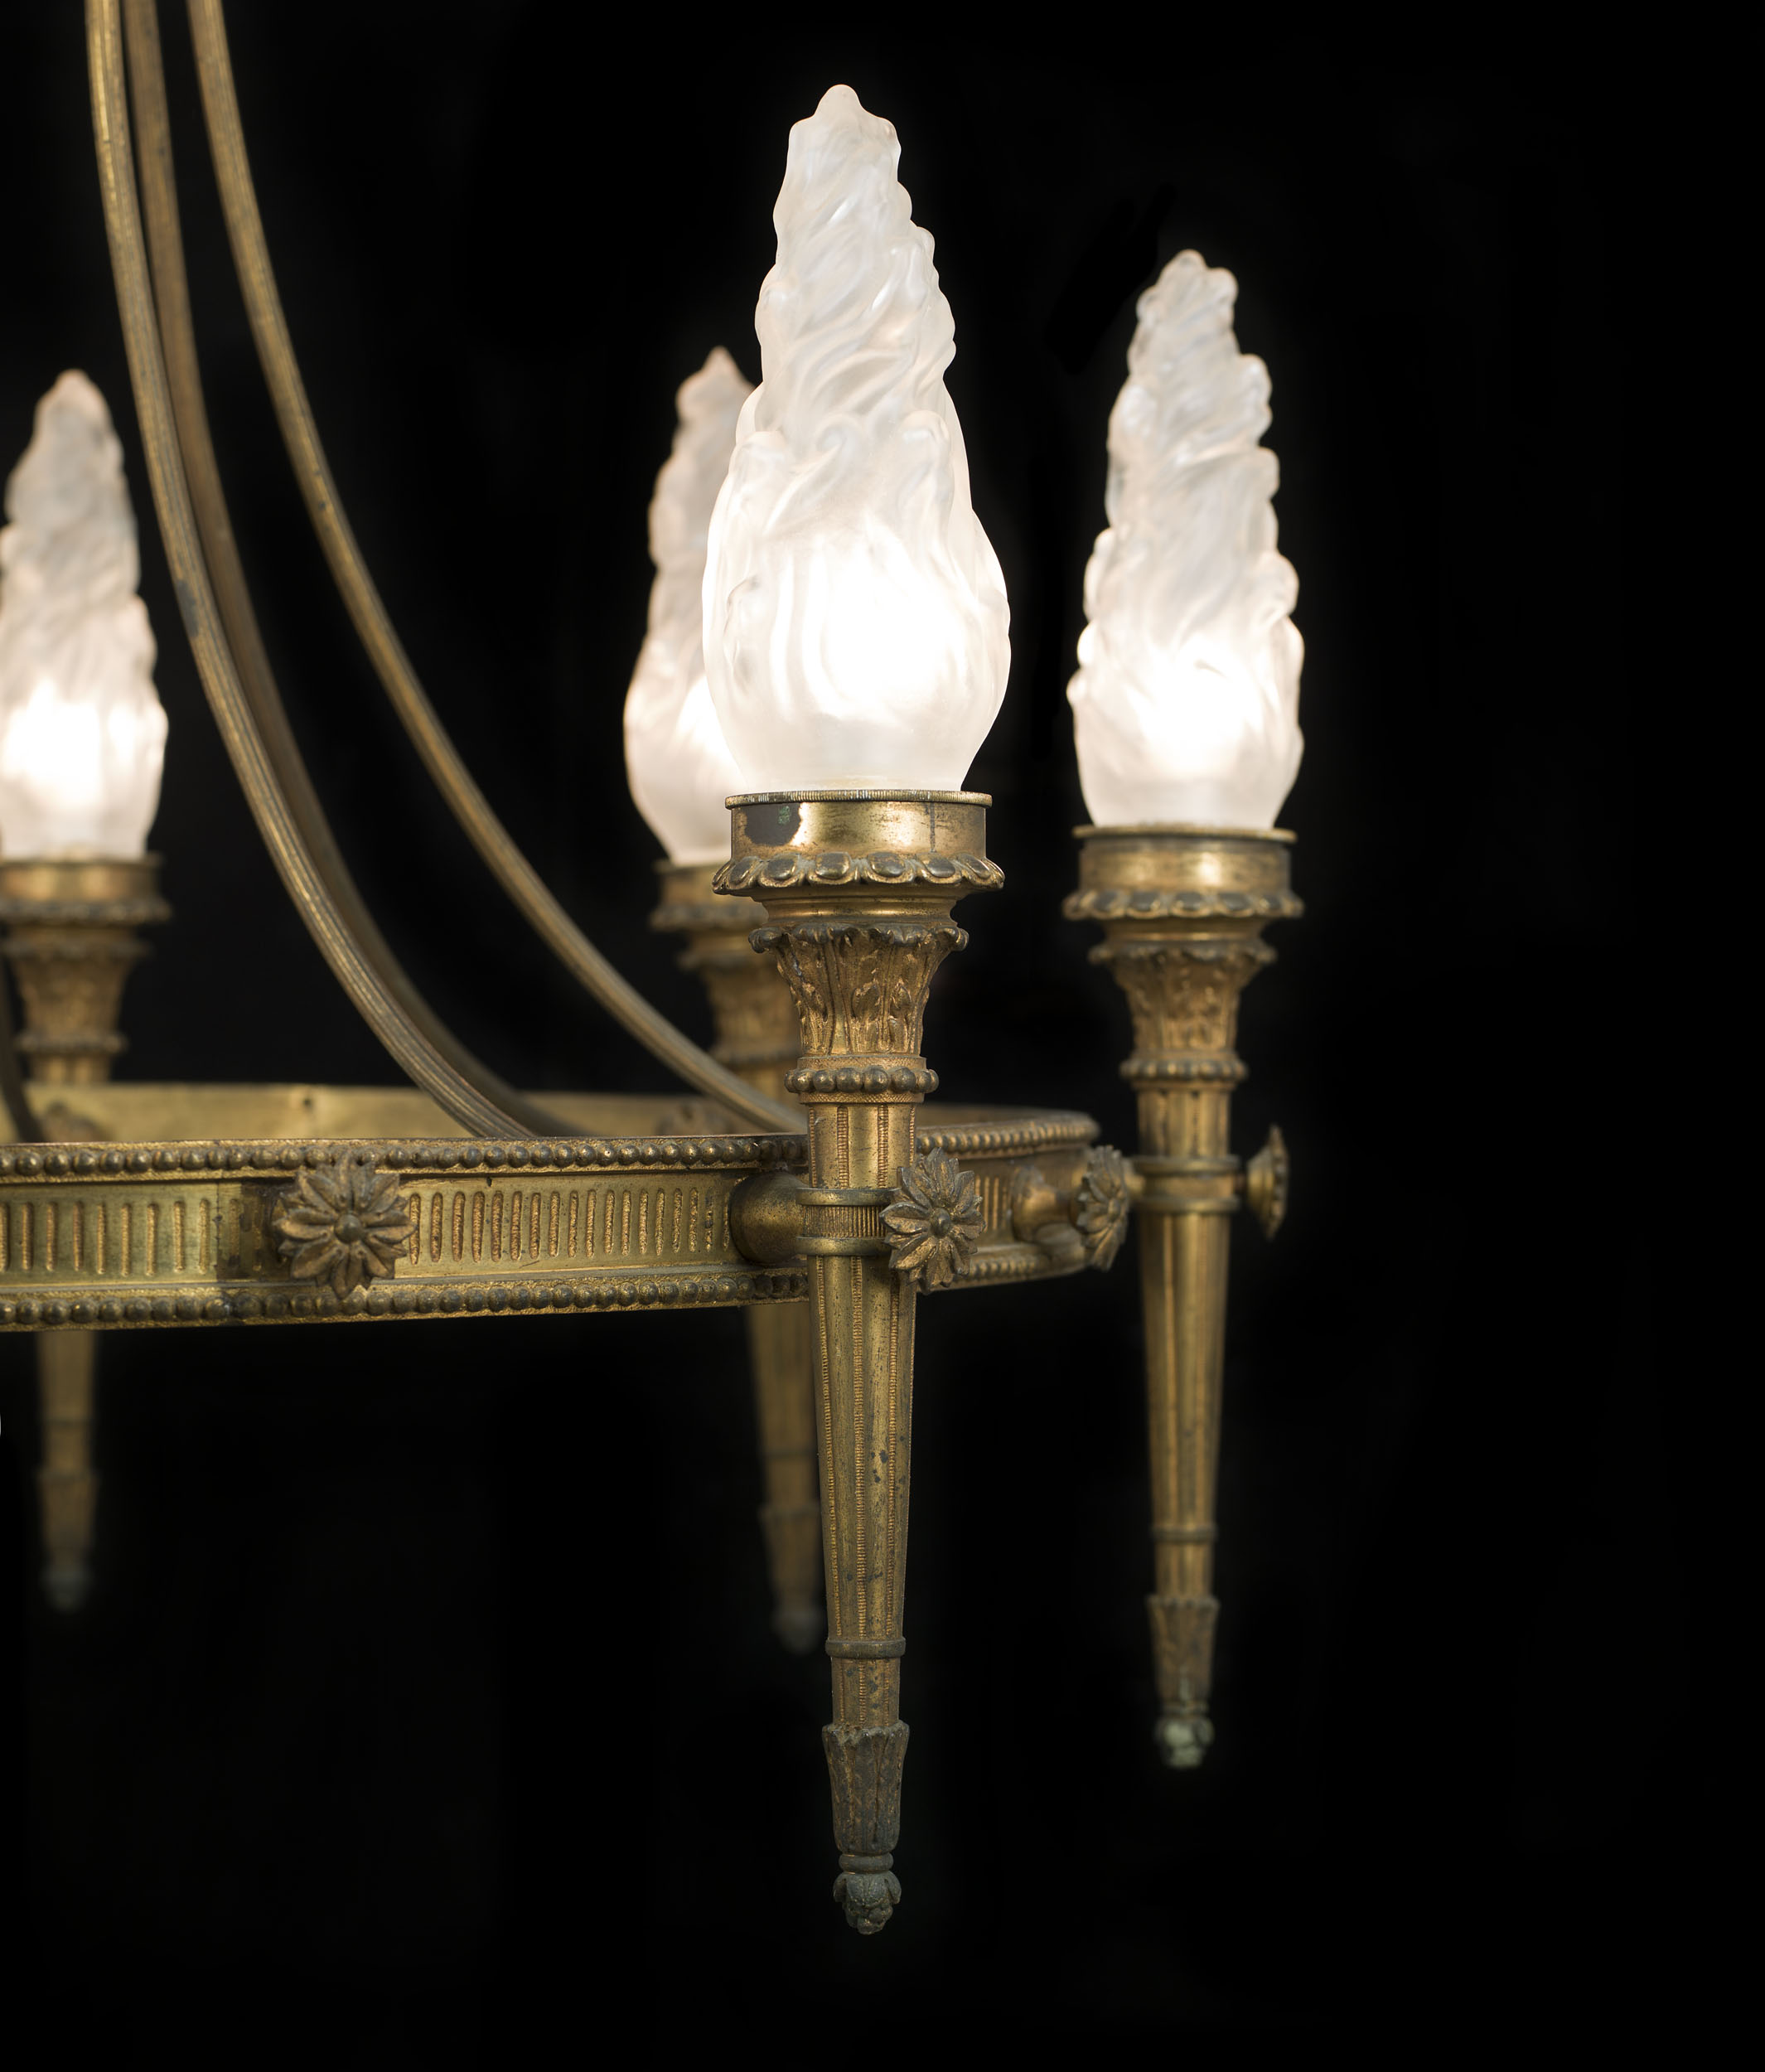 A Neoclassical Style Brass Torchere Chandelier